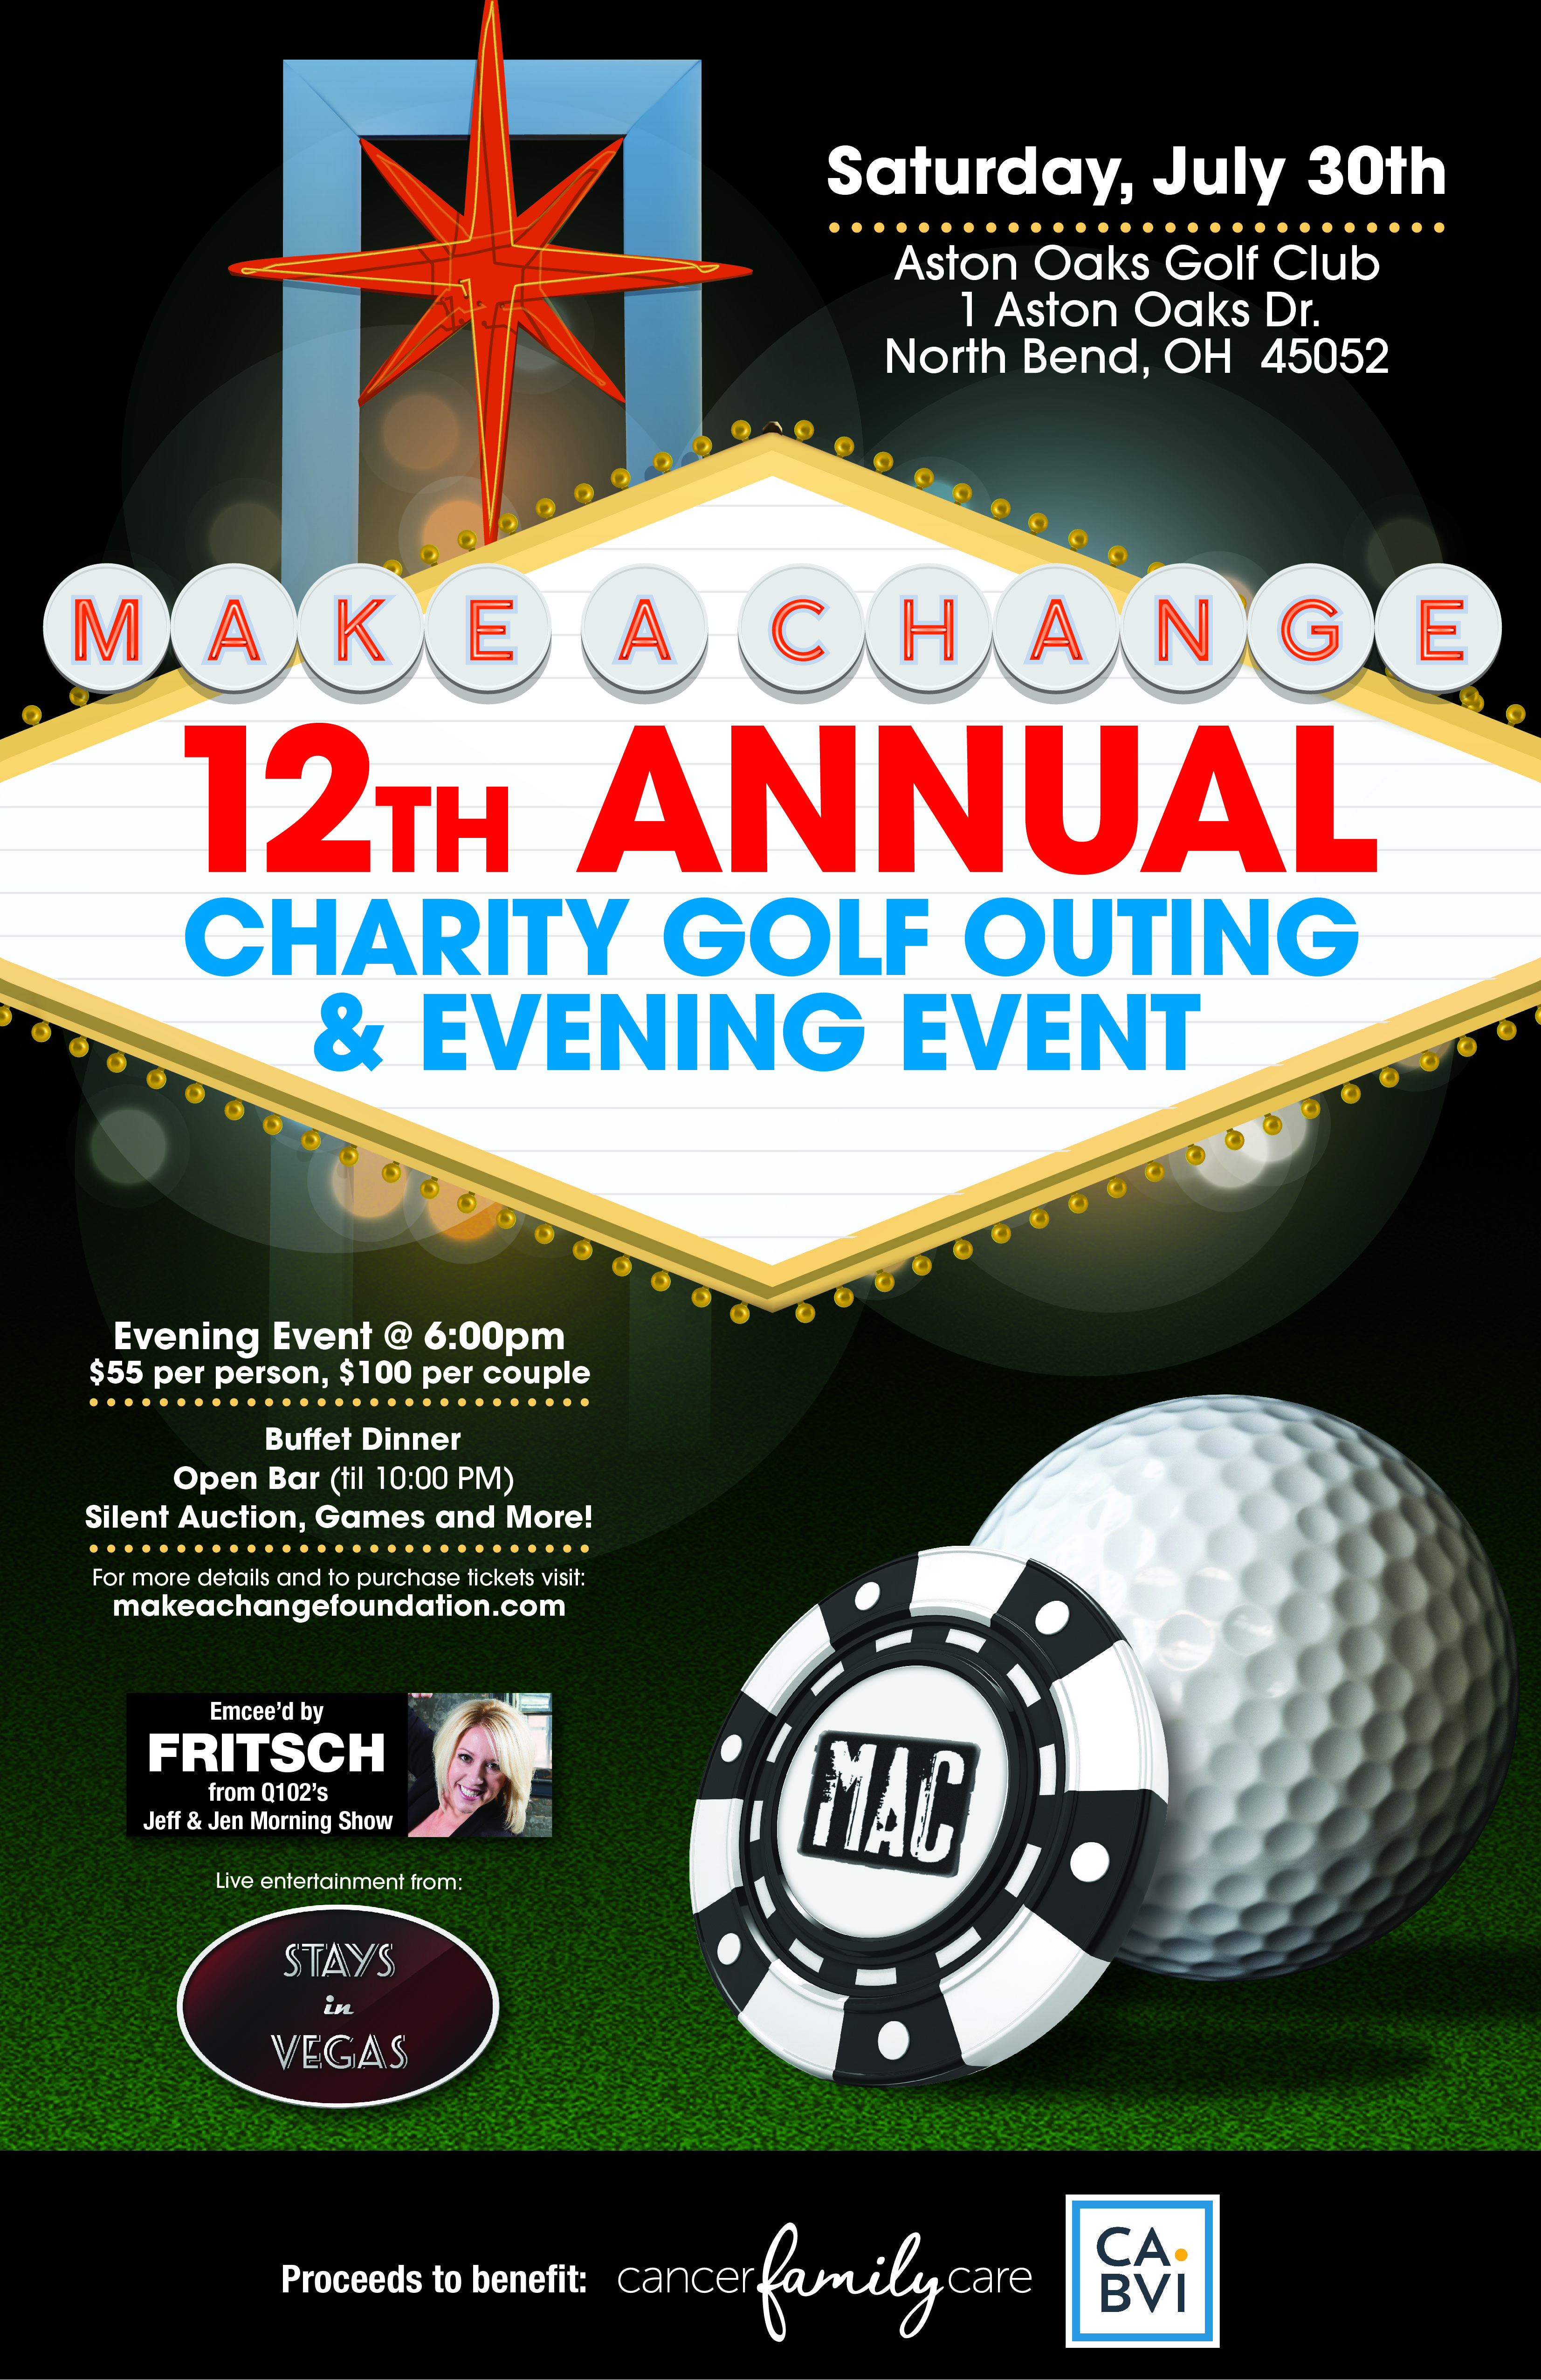 12th Annual Make A Change Charity Golf Outing & Evening Event